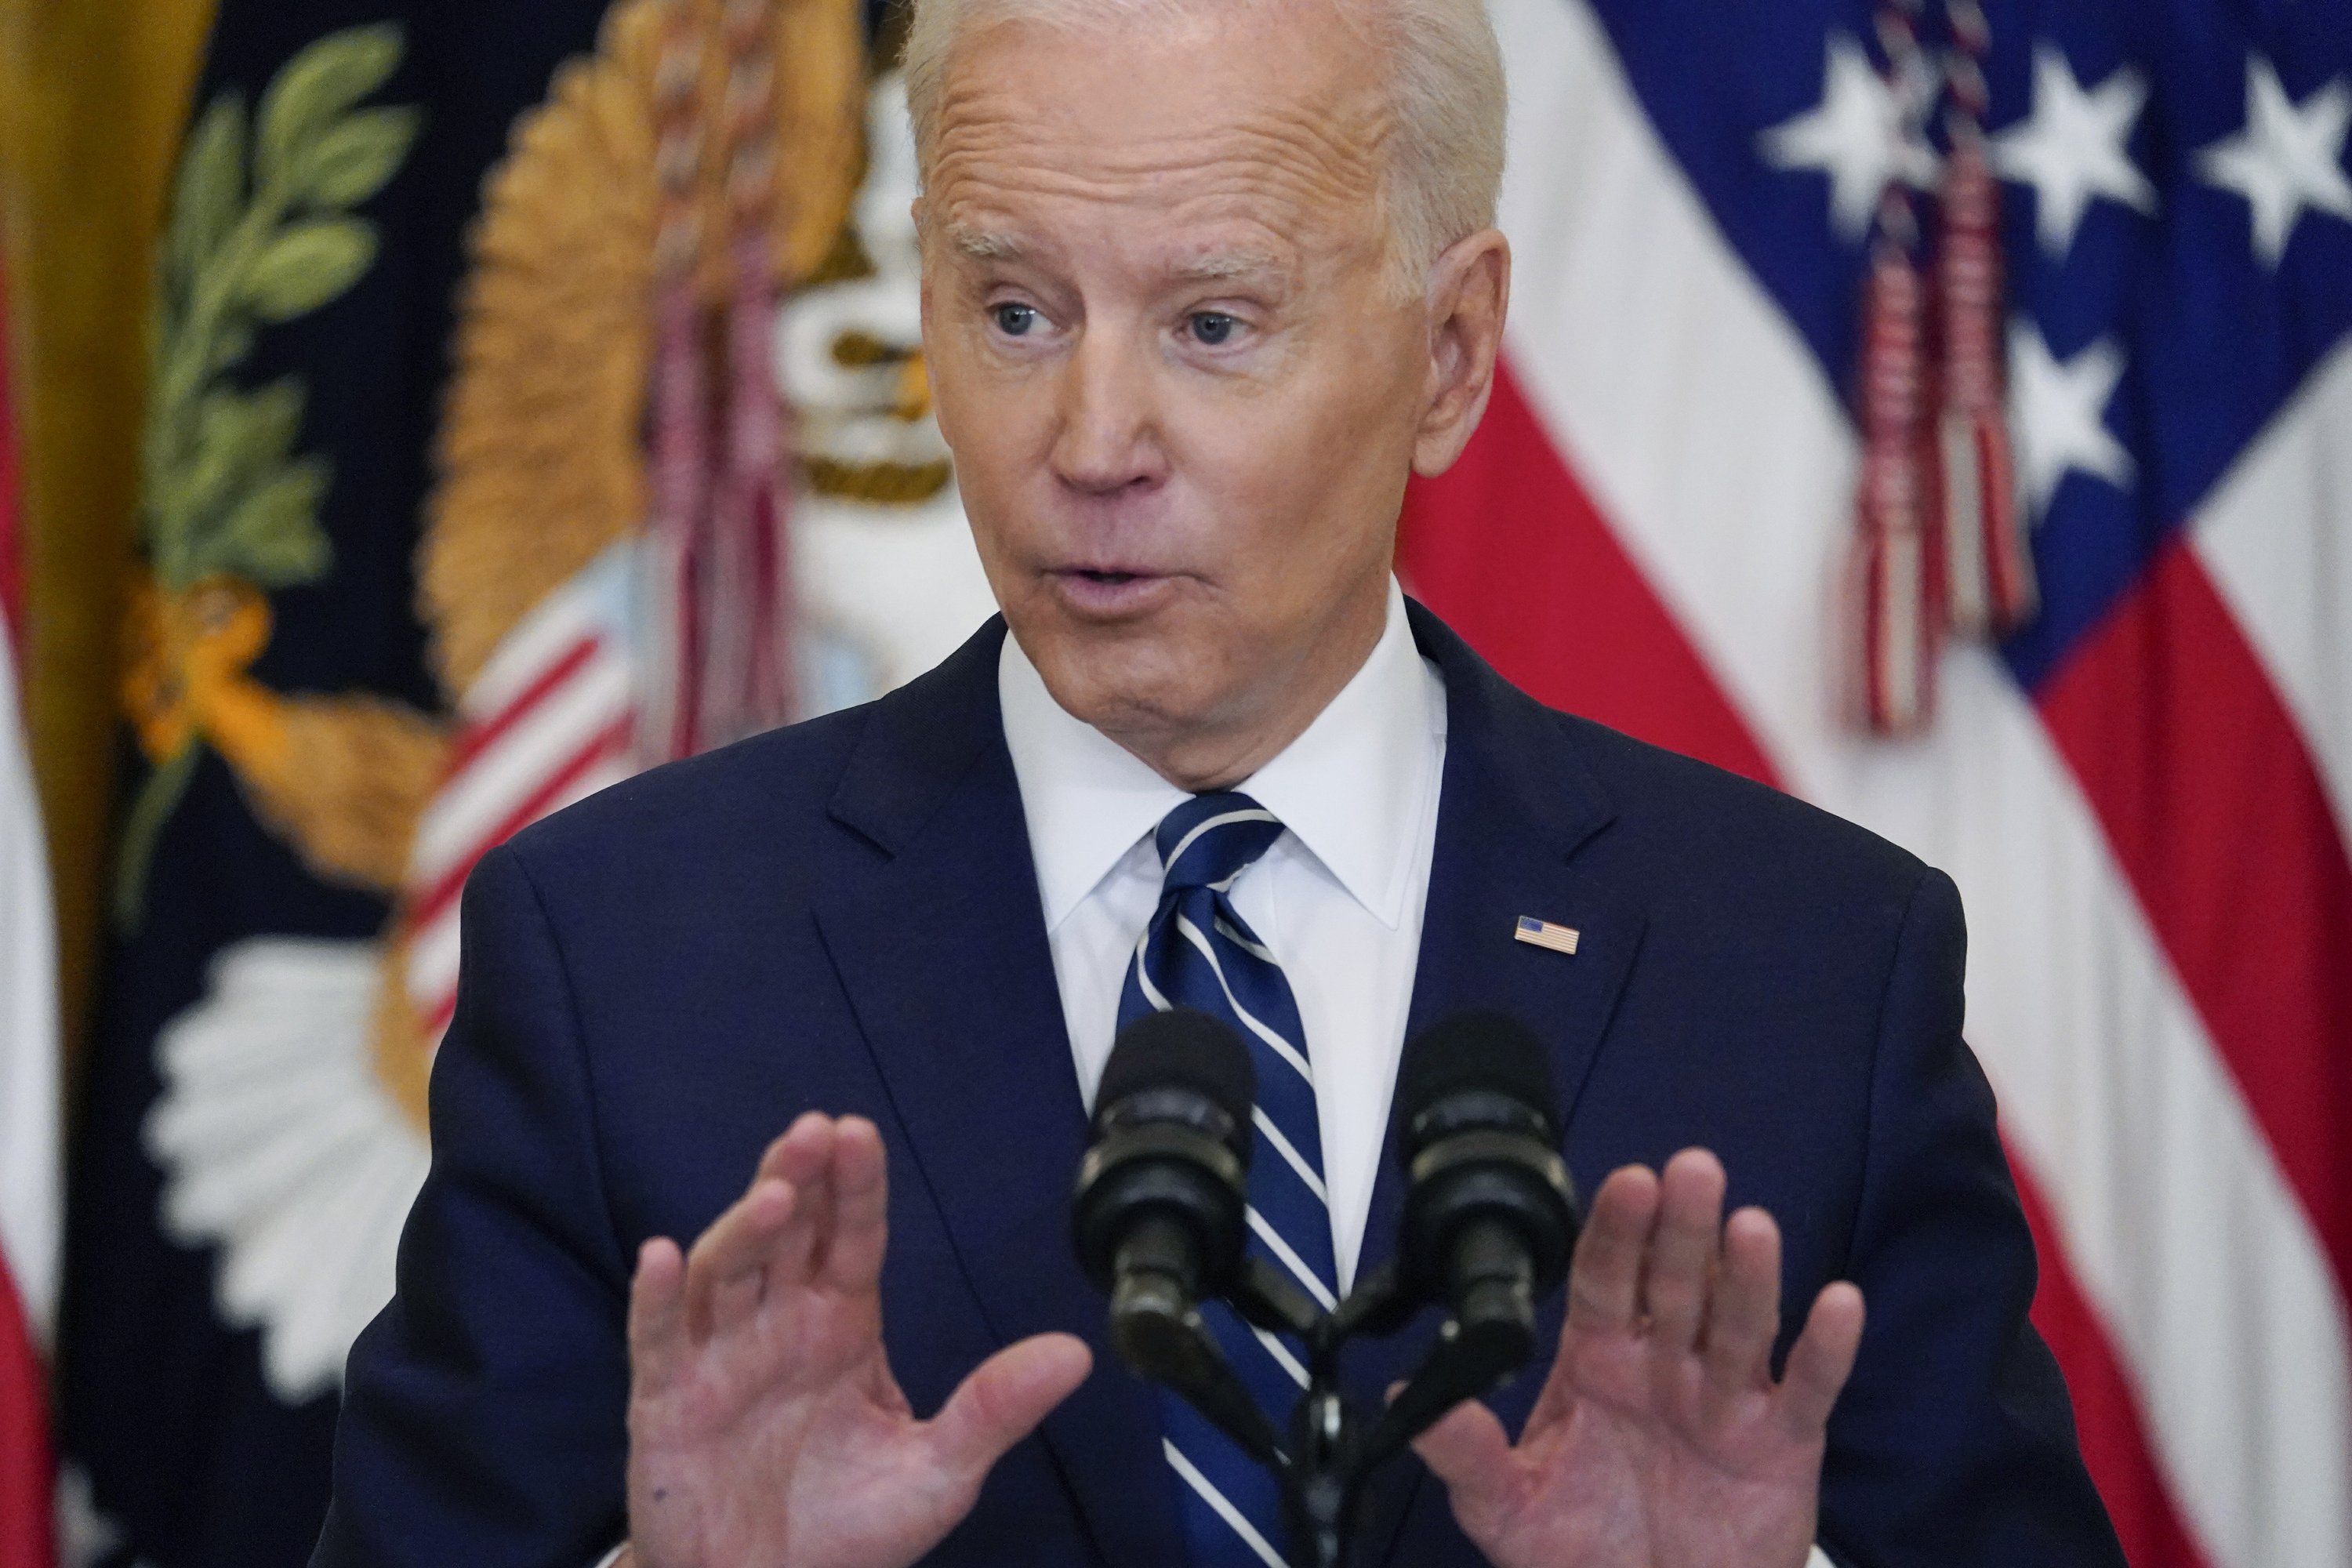 Biden invites Russia and China to the first global climate negotiations